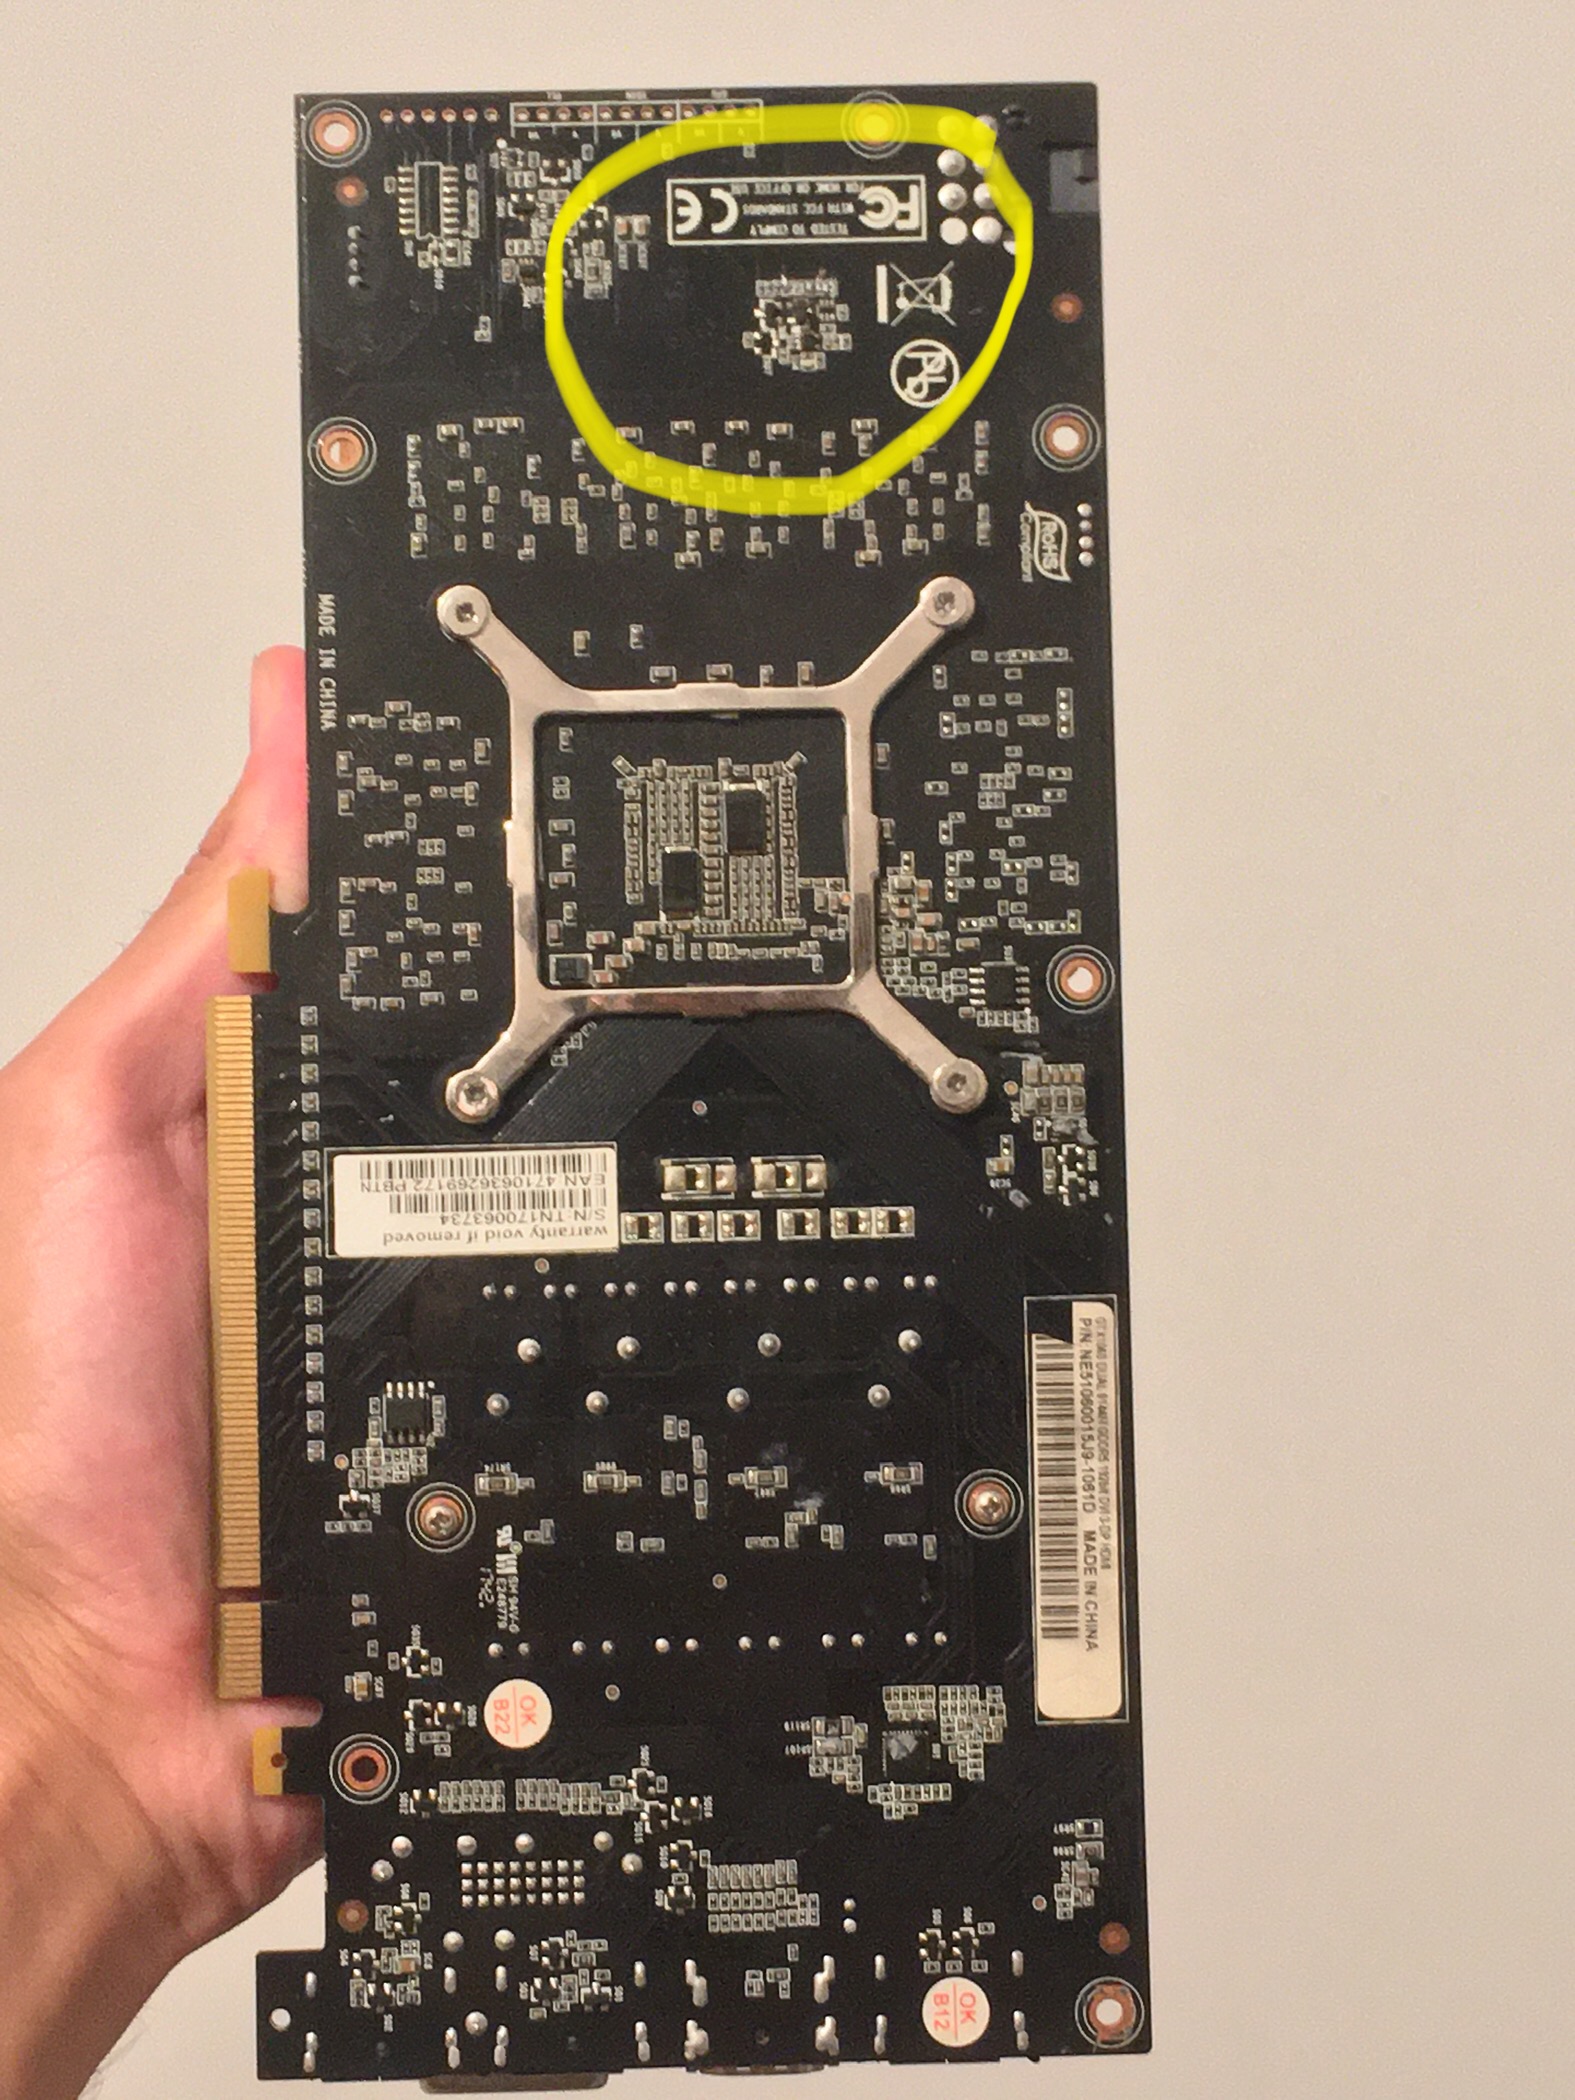 Mickey: Palit 1060 6gb Pcb pictures or schematics [​IMG]